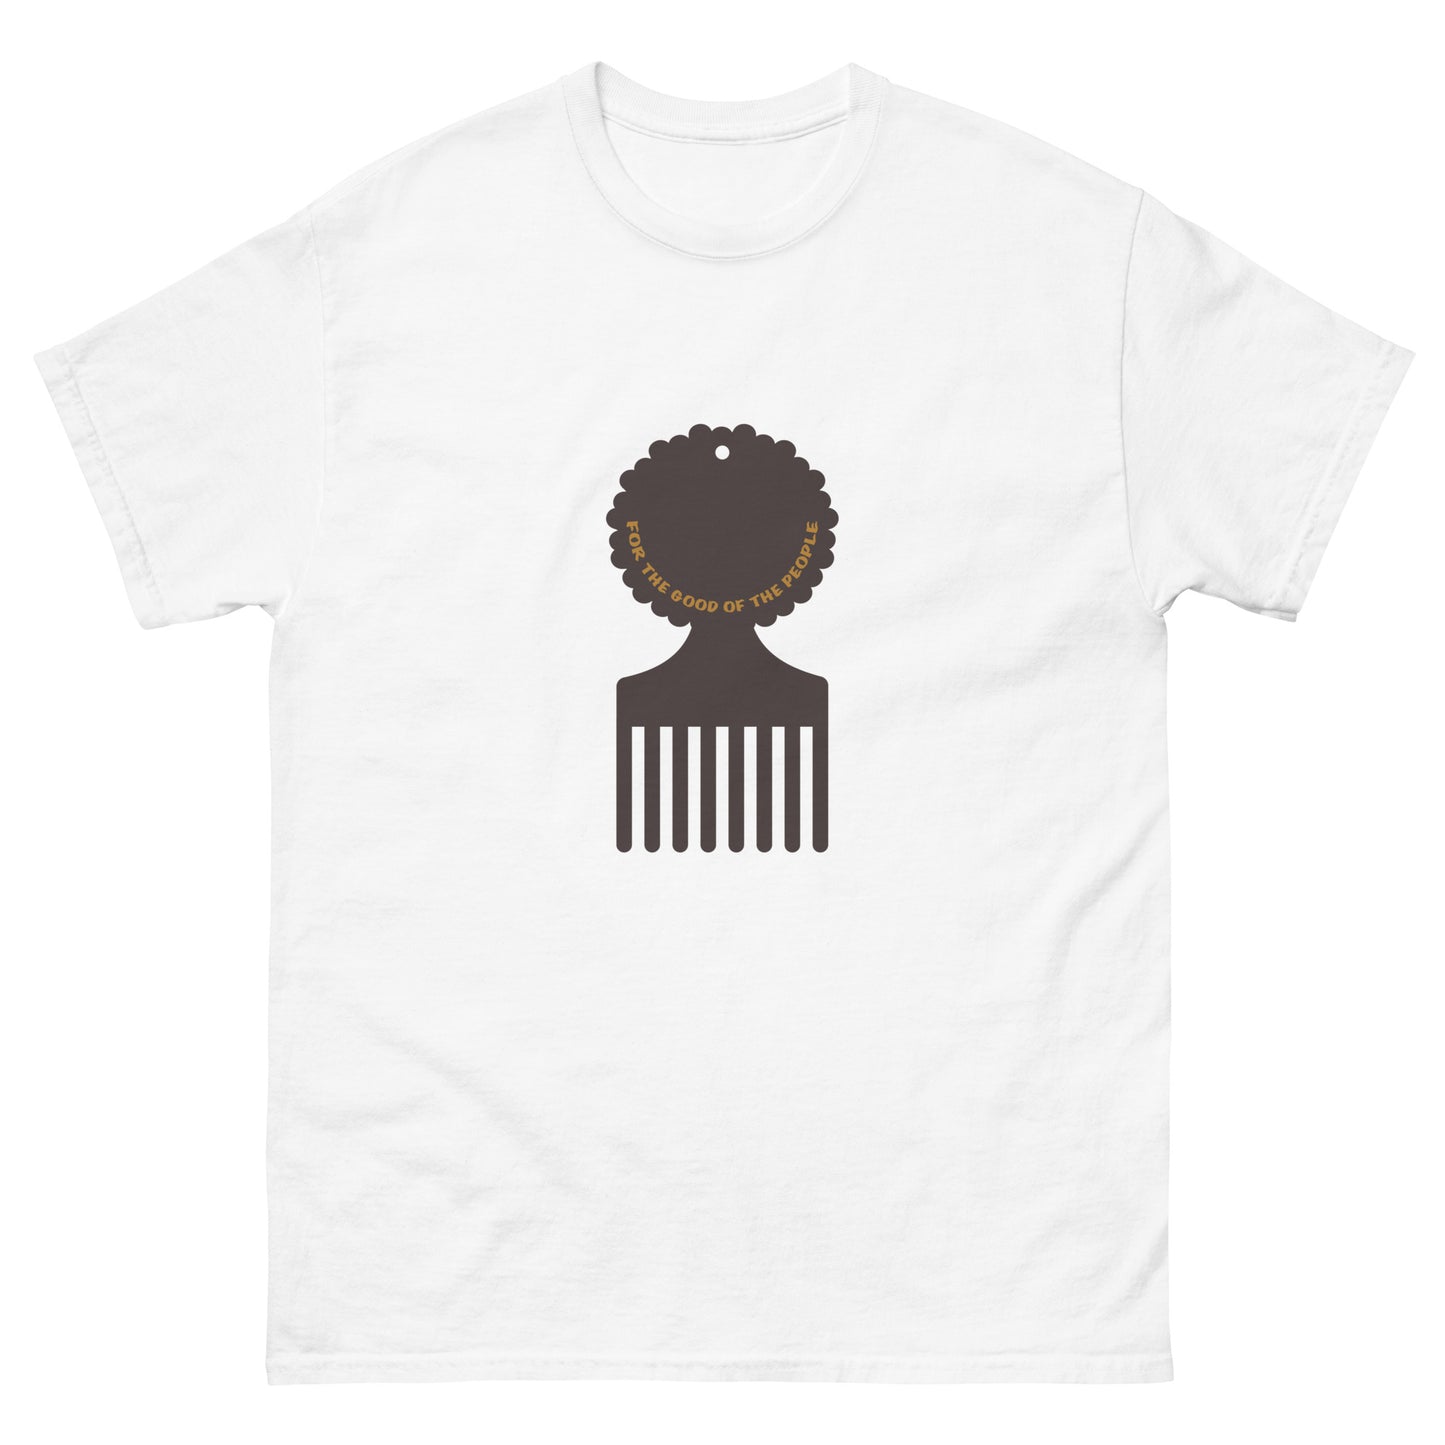 Men's white tee with brown afro pick in the center of shirt, with for the good of the people in gold inside the afro pick's handle.